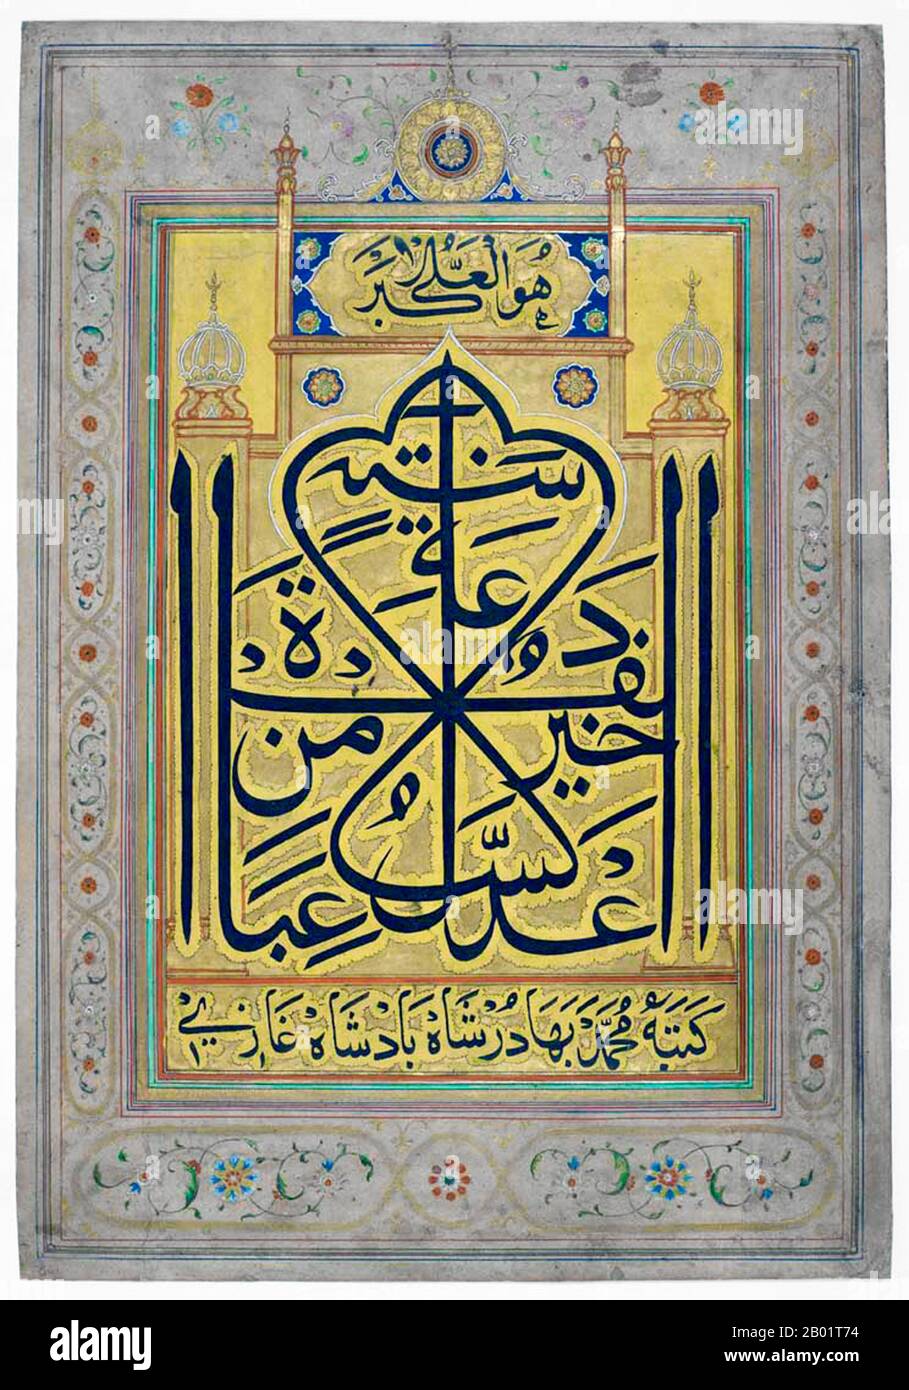 India: Arabic calligraphy by Bahadur Shah Zafar (24 October 1775 - 7 November 1862), the last Mughal Emperor (r. 1837-1857), c. 1850.  Bahadur Shah II, born Abu Zafar Sirajuddin Muhammad Bahadur Shah Zafar, was last of the Mughal emperors in India, and ruler of the Timurid Dynasty. He was son of Akbar Shah II and Lalbai, who was a Hindu Rajput. He became Mughal Emperor when his father died on 28 September 1837. He was widely known as Bahadur Shah Zafar.  Bahadur Shah Zafar was a noted Urdu poet, and wrote a large number of Urdu ghazals. Stock Photo